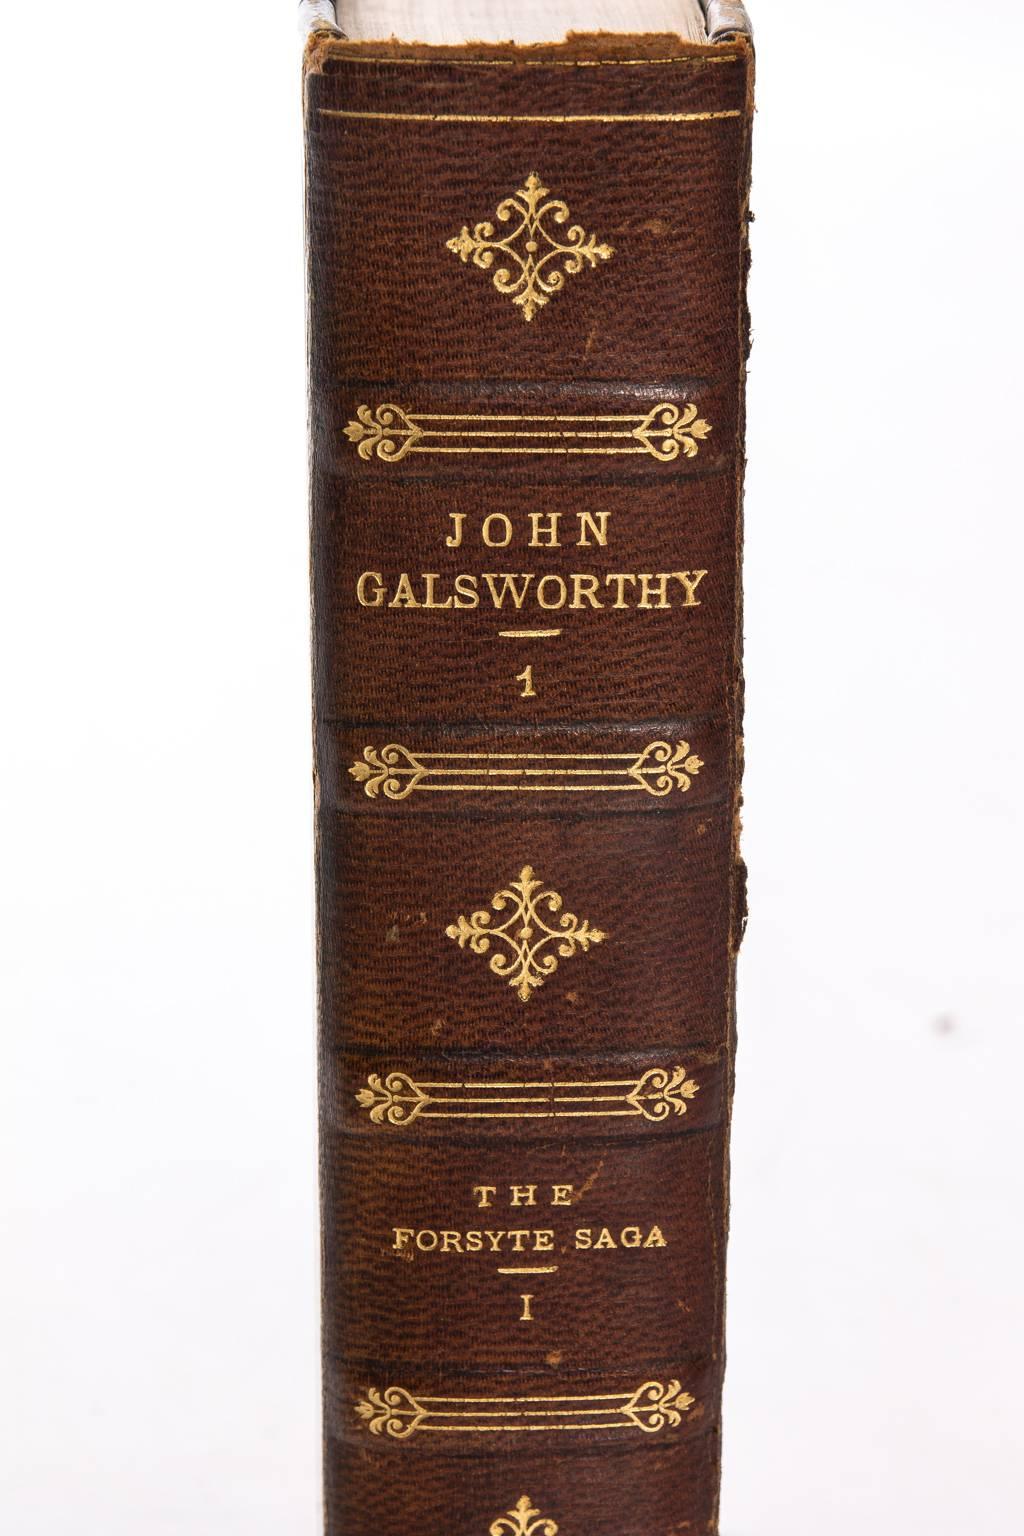 Leather Bound Works of Glasworthy 21 Volumes For Sale 1